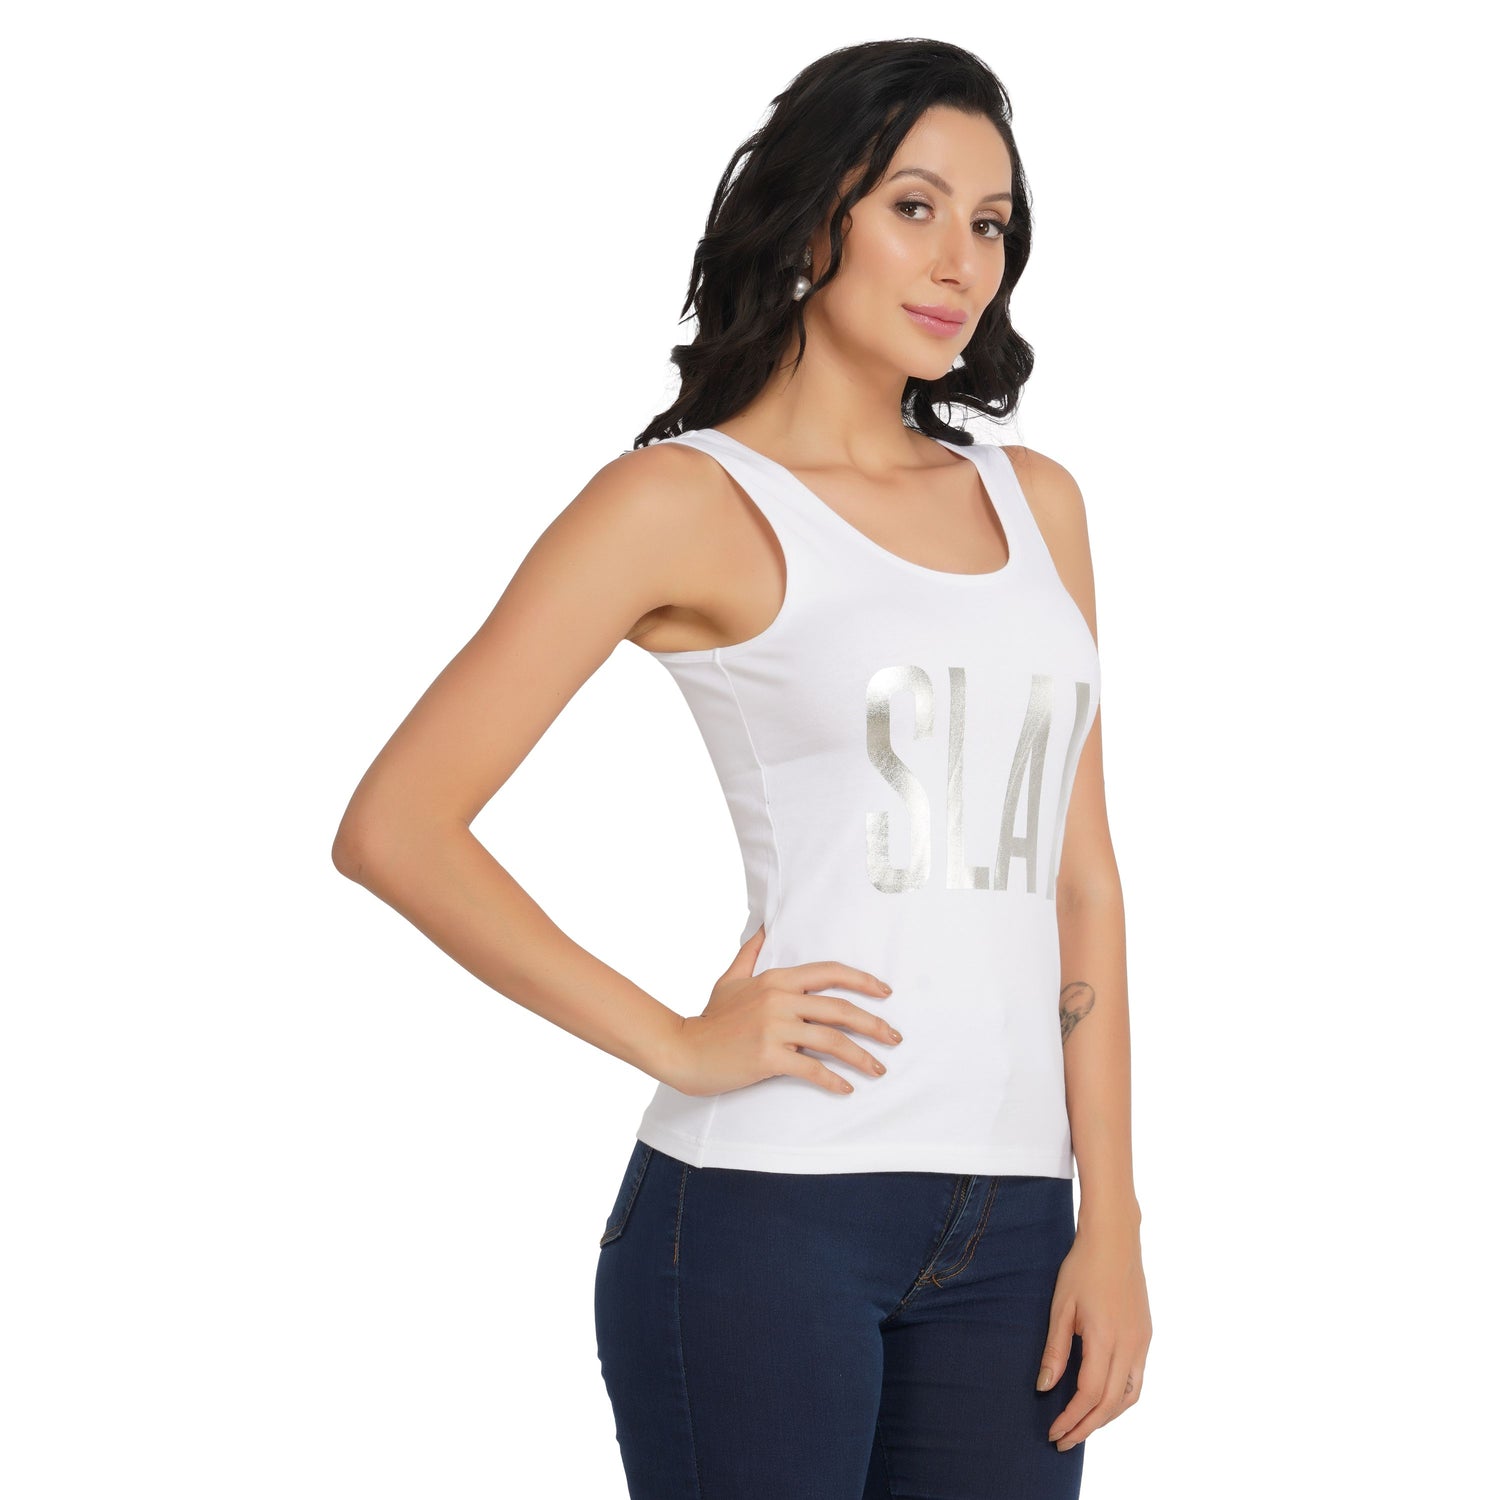 SLAY. Women's Limited Edition Silver Foil Printed Tank Top - Matte Finish-clothing-to-slay.myshopify.com-Tank Top